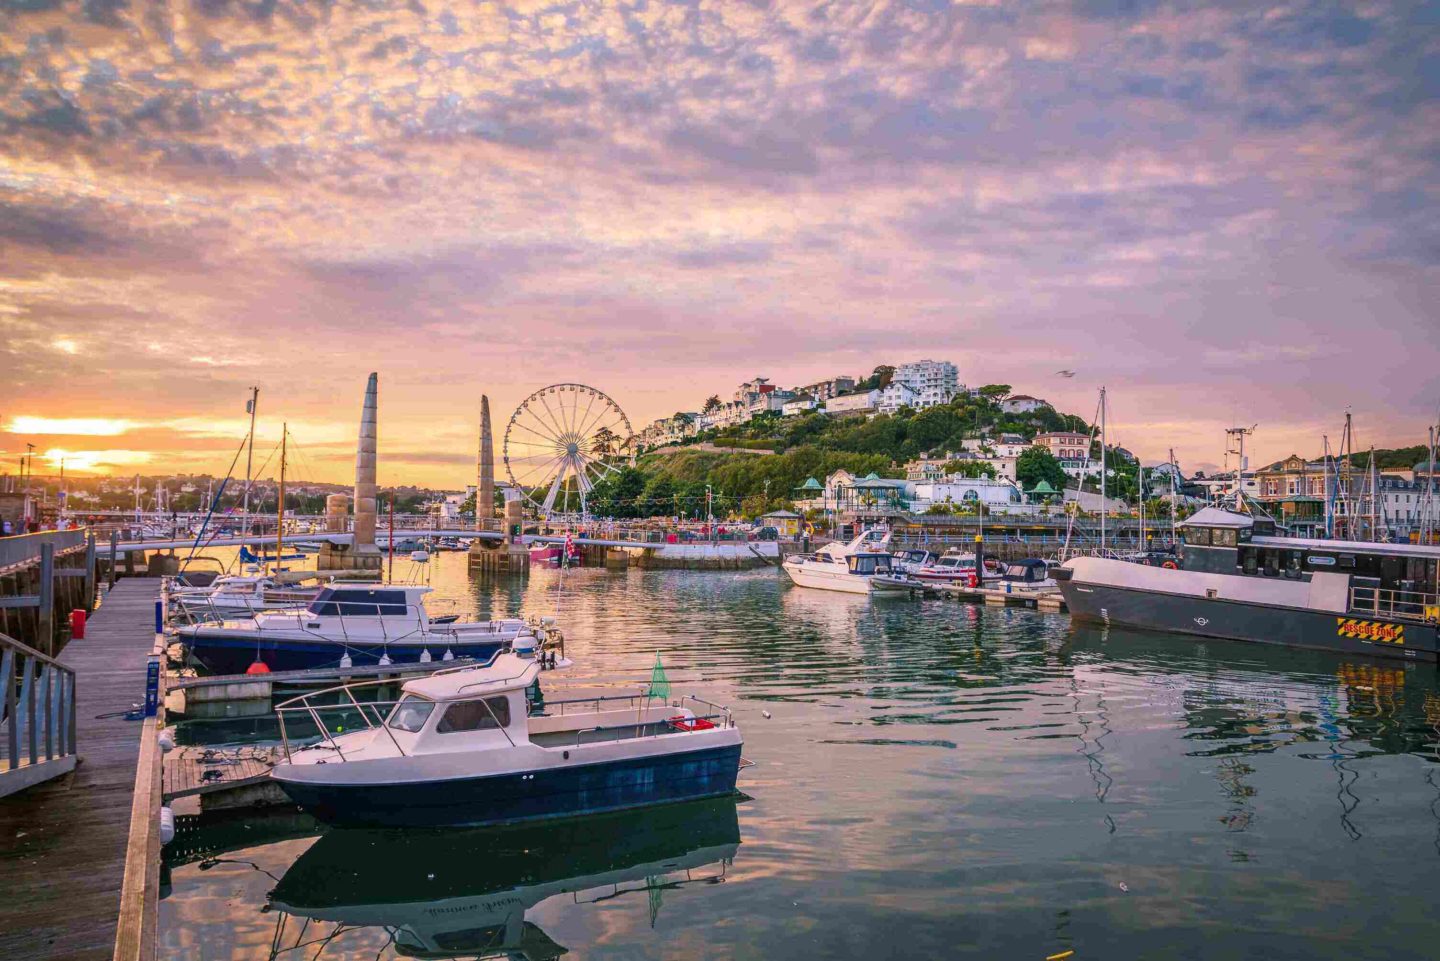 Torquay Harbour at sunset